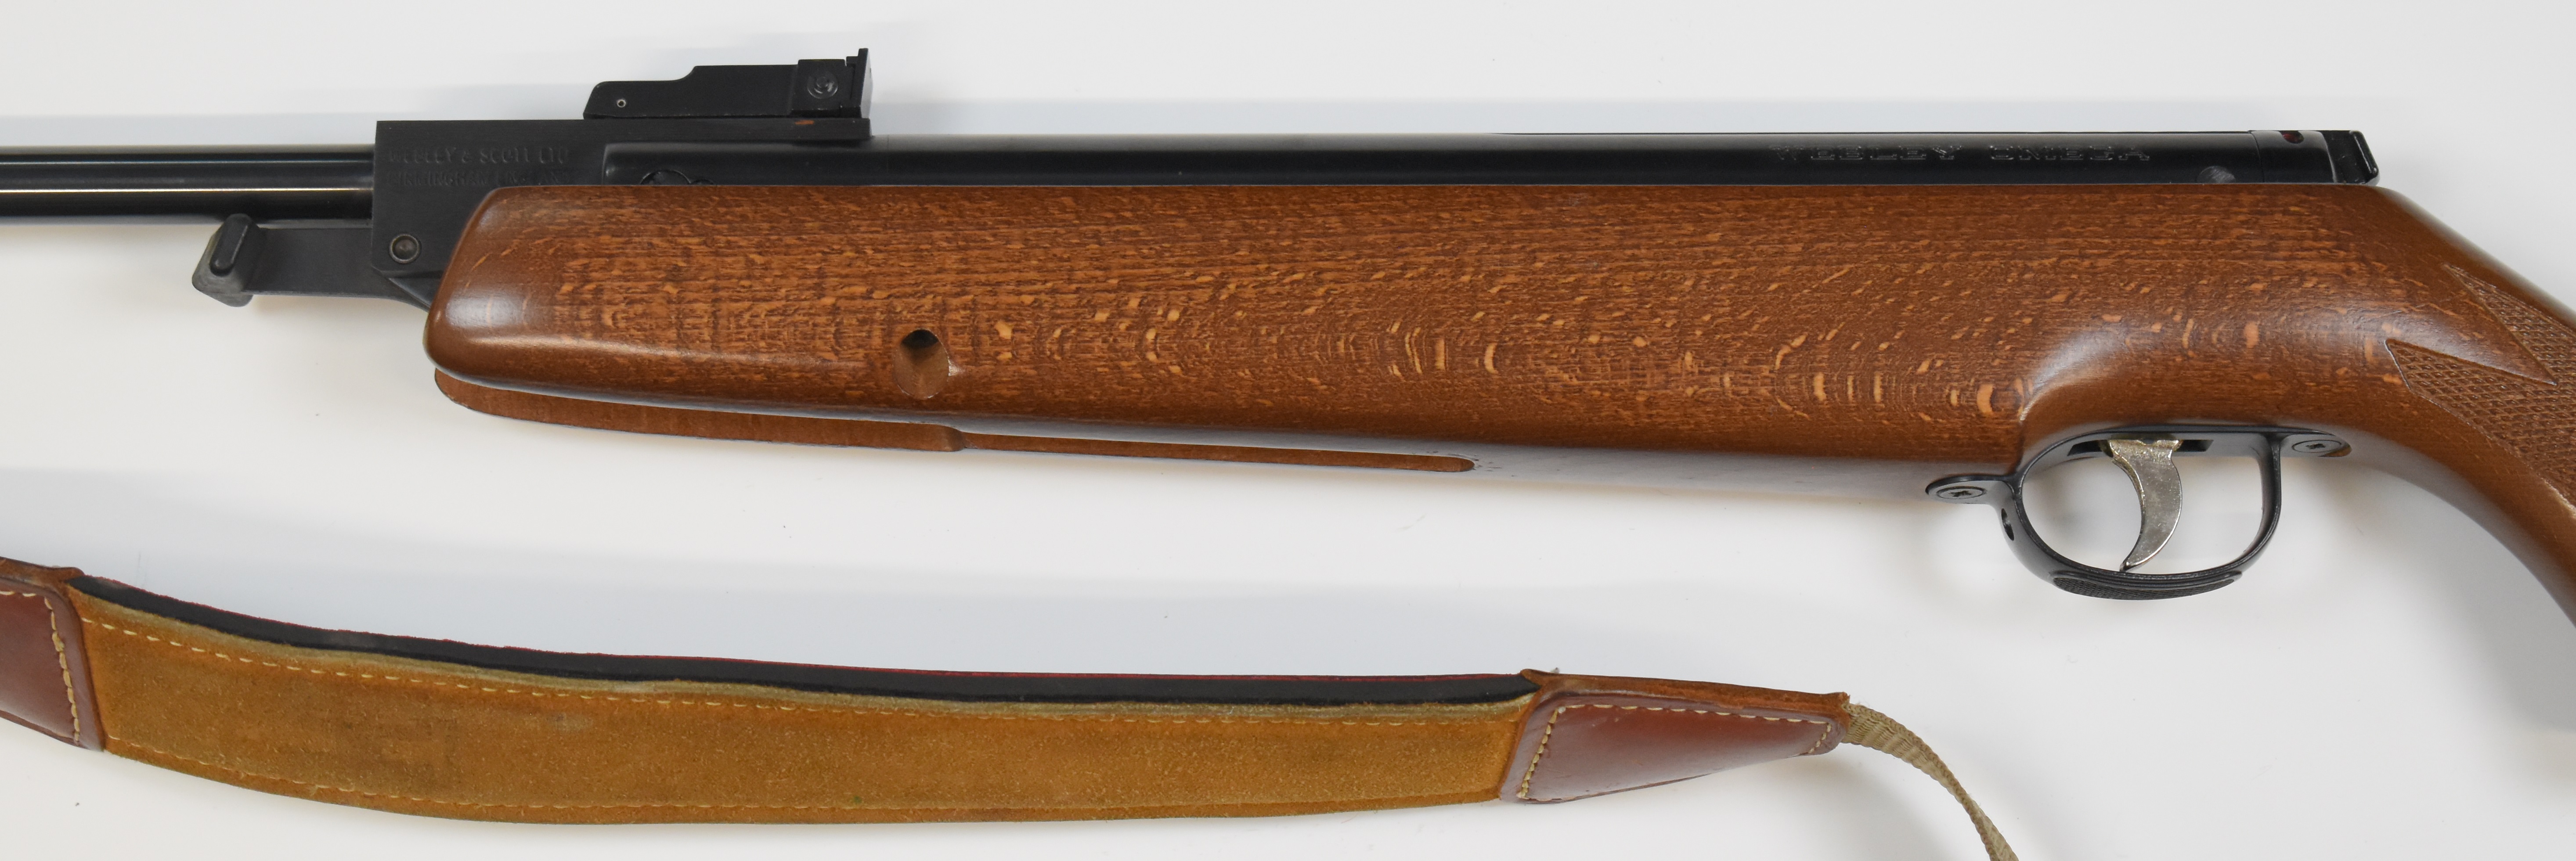 Webley Omega .177 air rifle with chequered semi-pistol grip, raised cheek piece, padded canvas and - Image 9 of 12